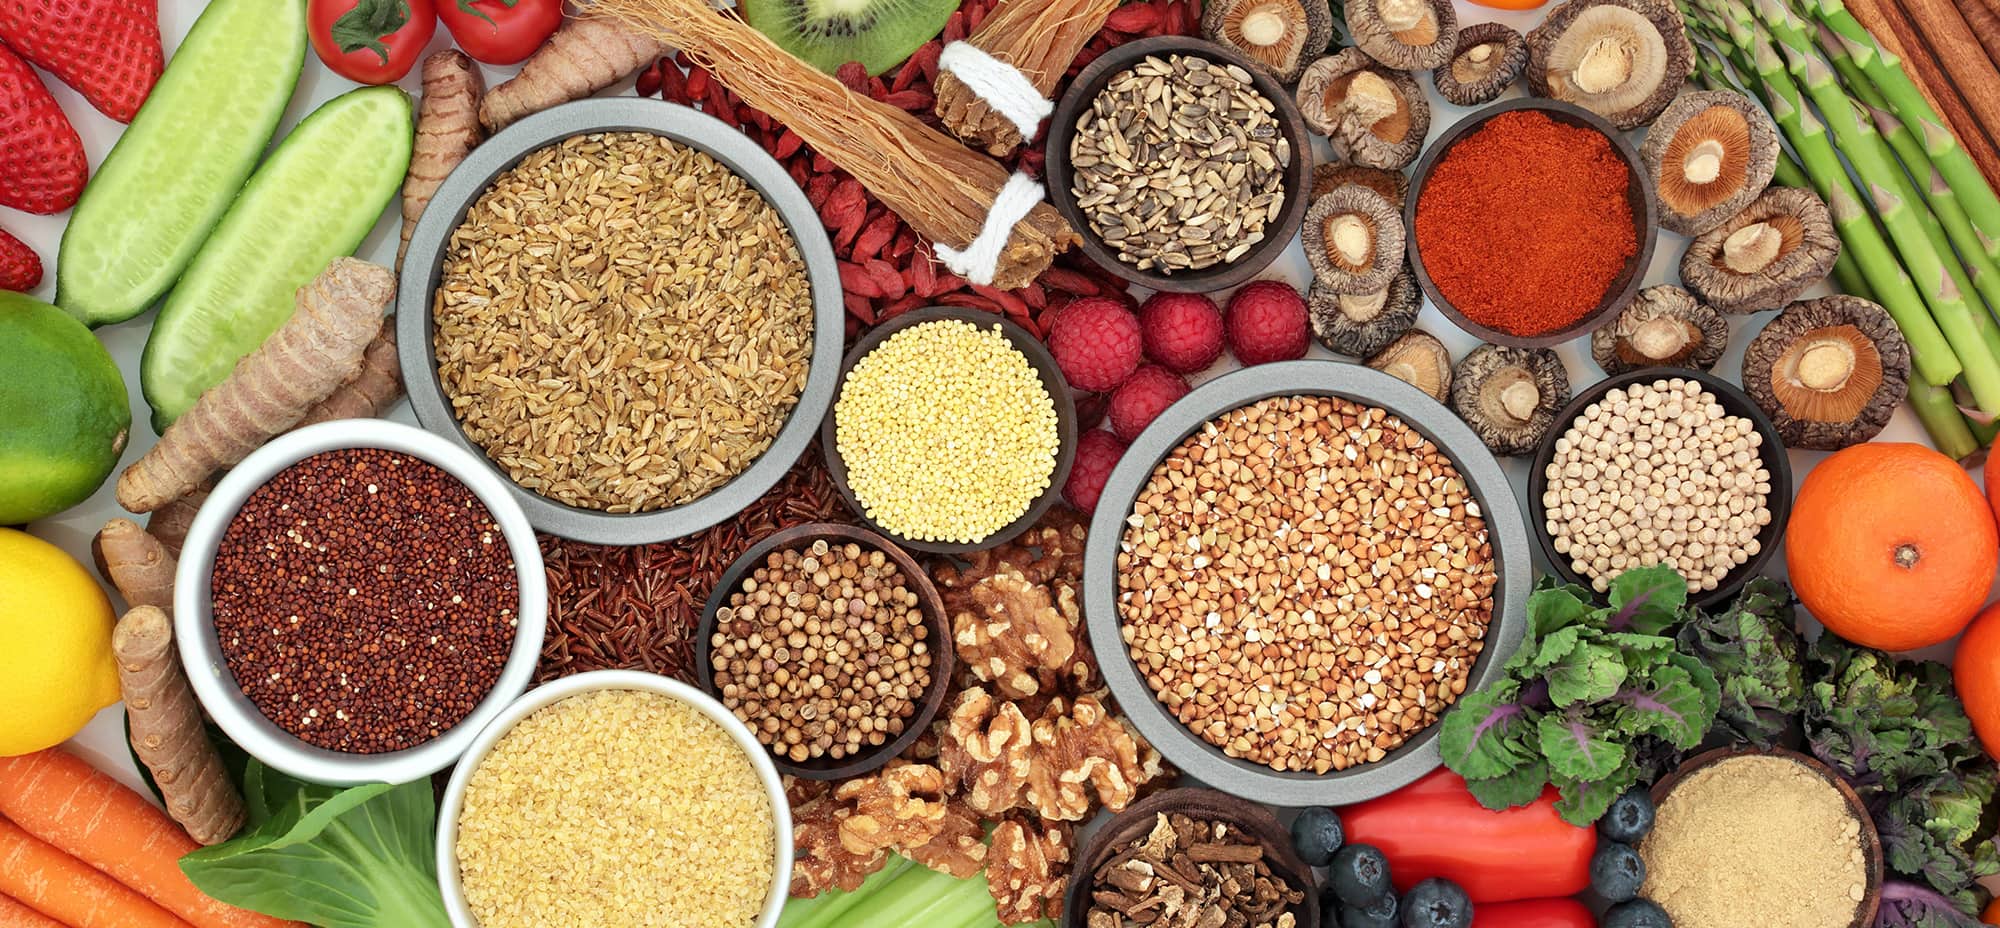 Different grains are pictured which meet various dietary requirements